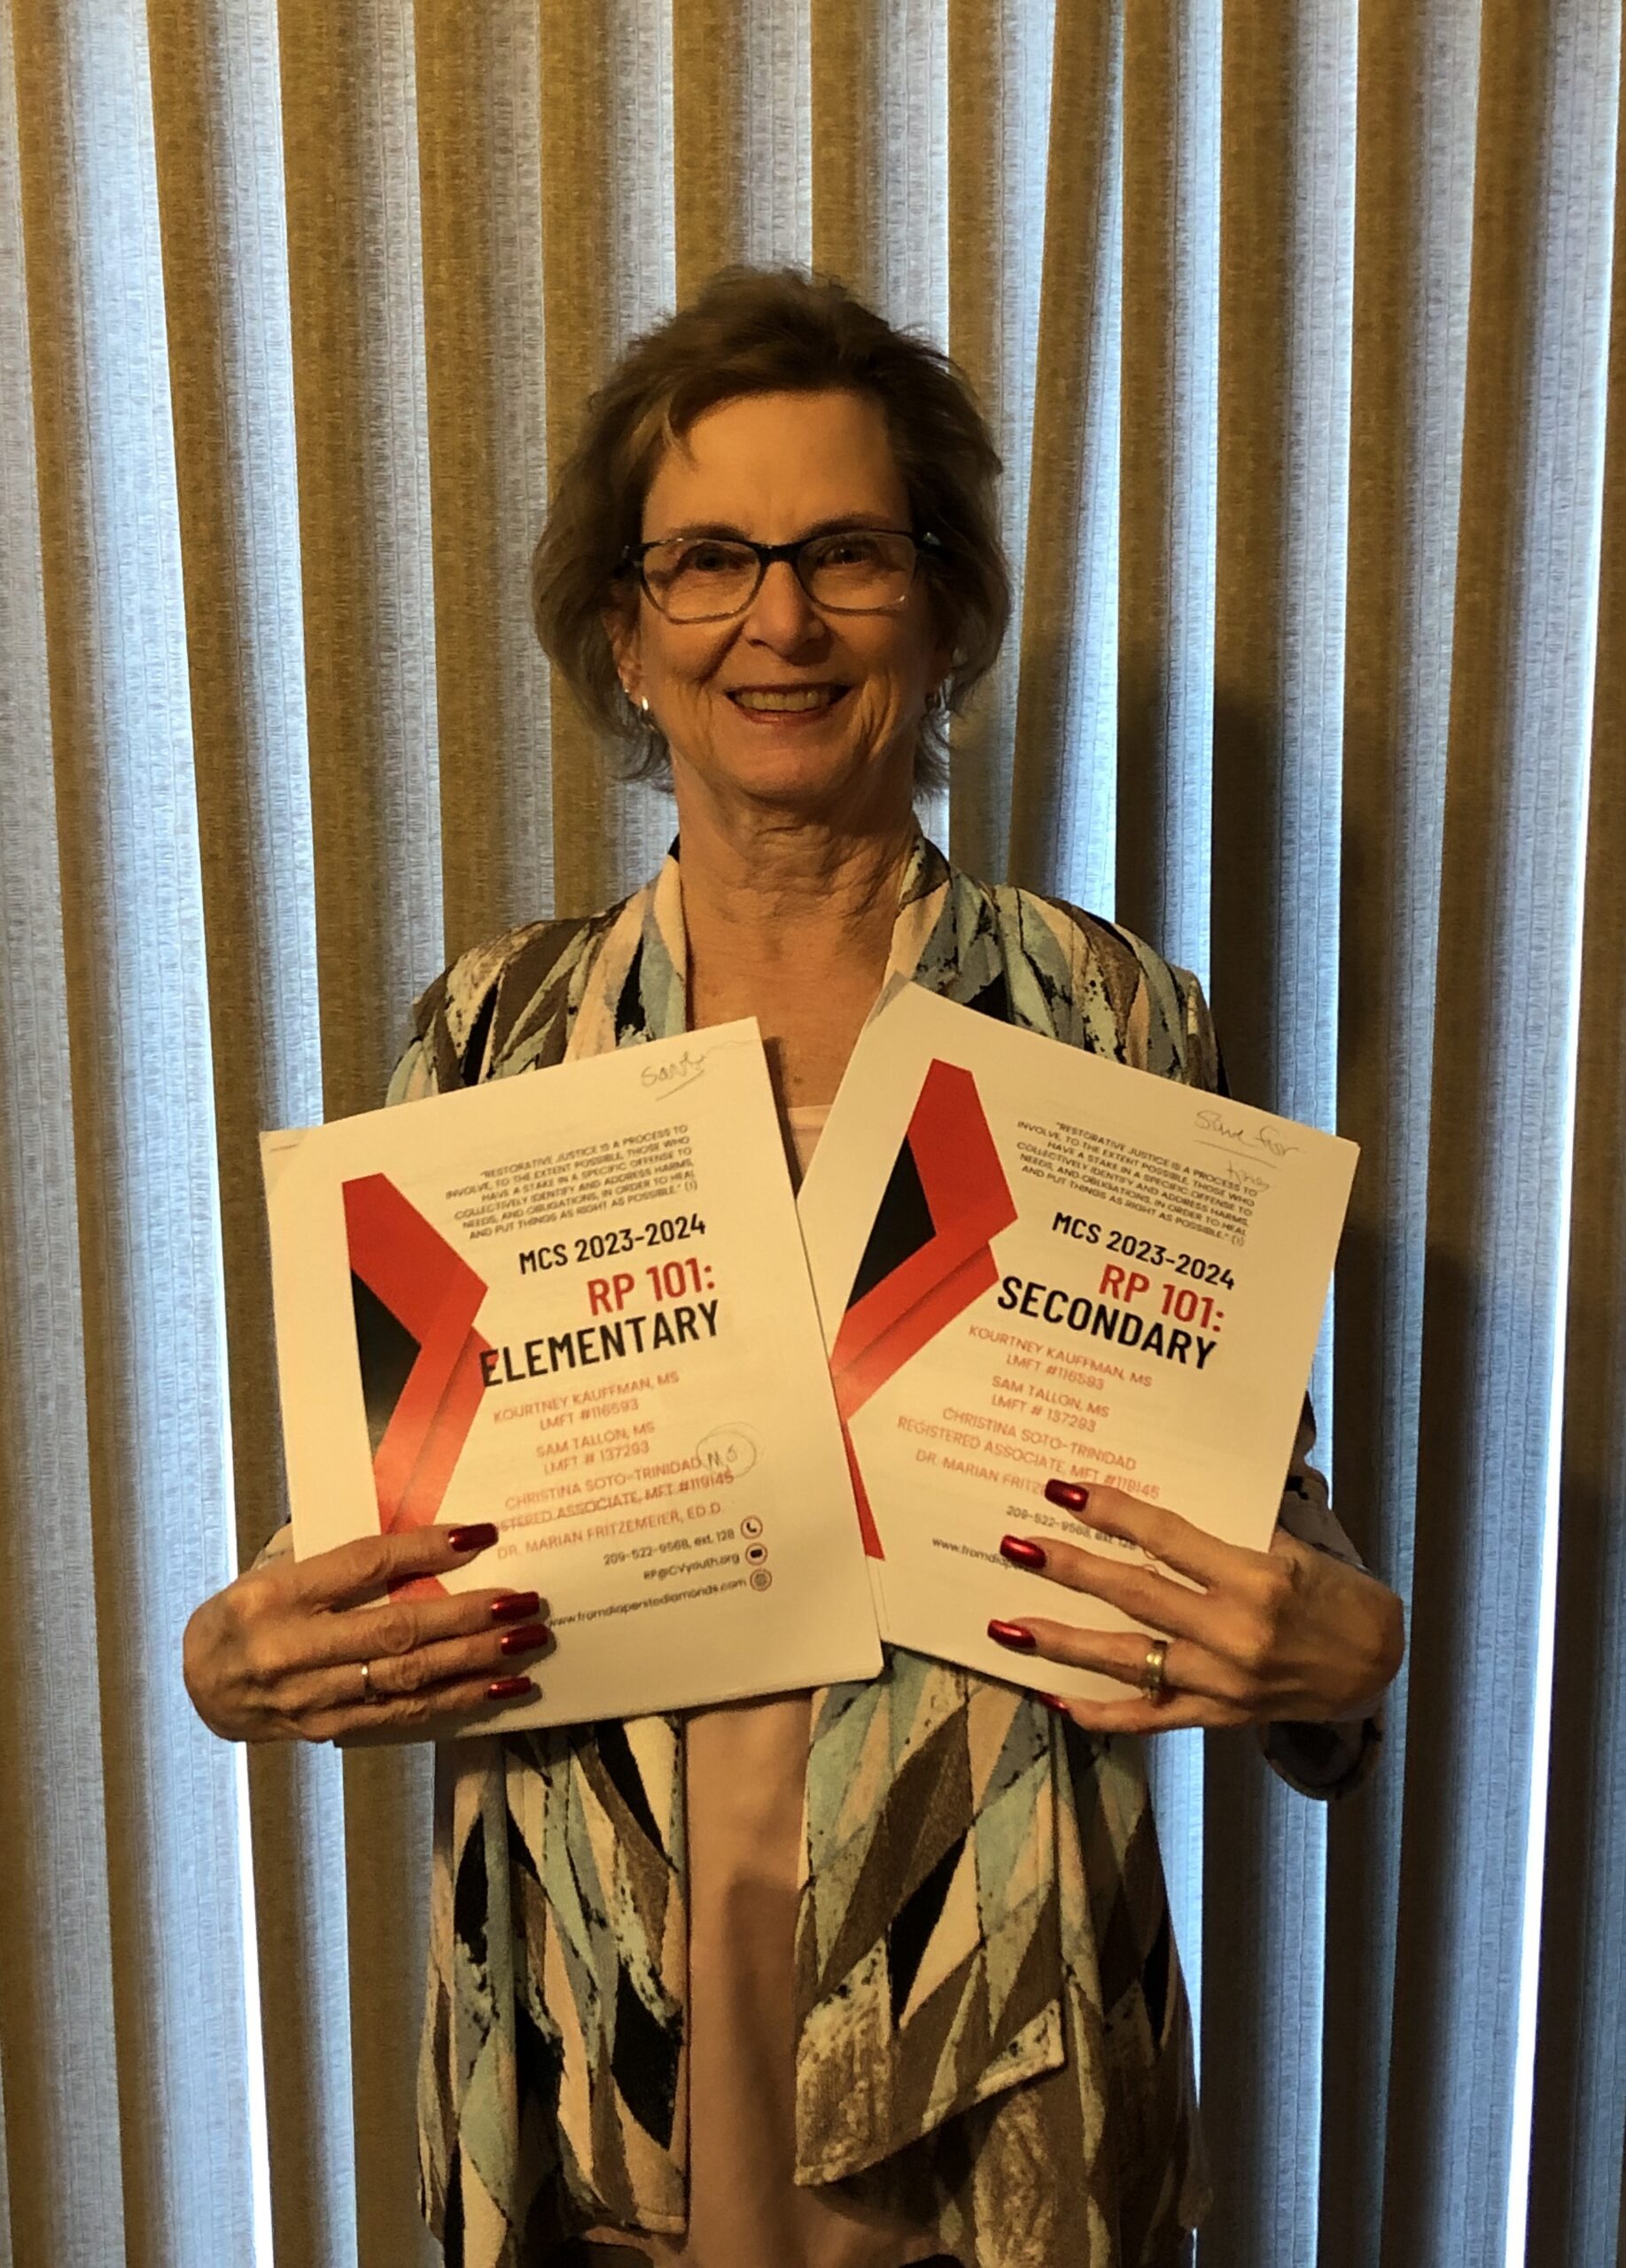 Dr. Marian Fritzemeier, Ed.D. with title pages for elementary and secondary.